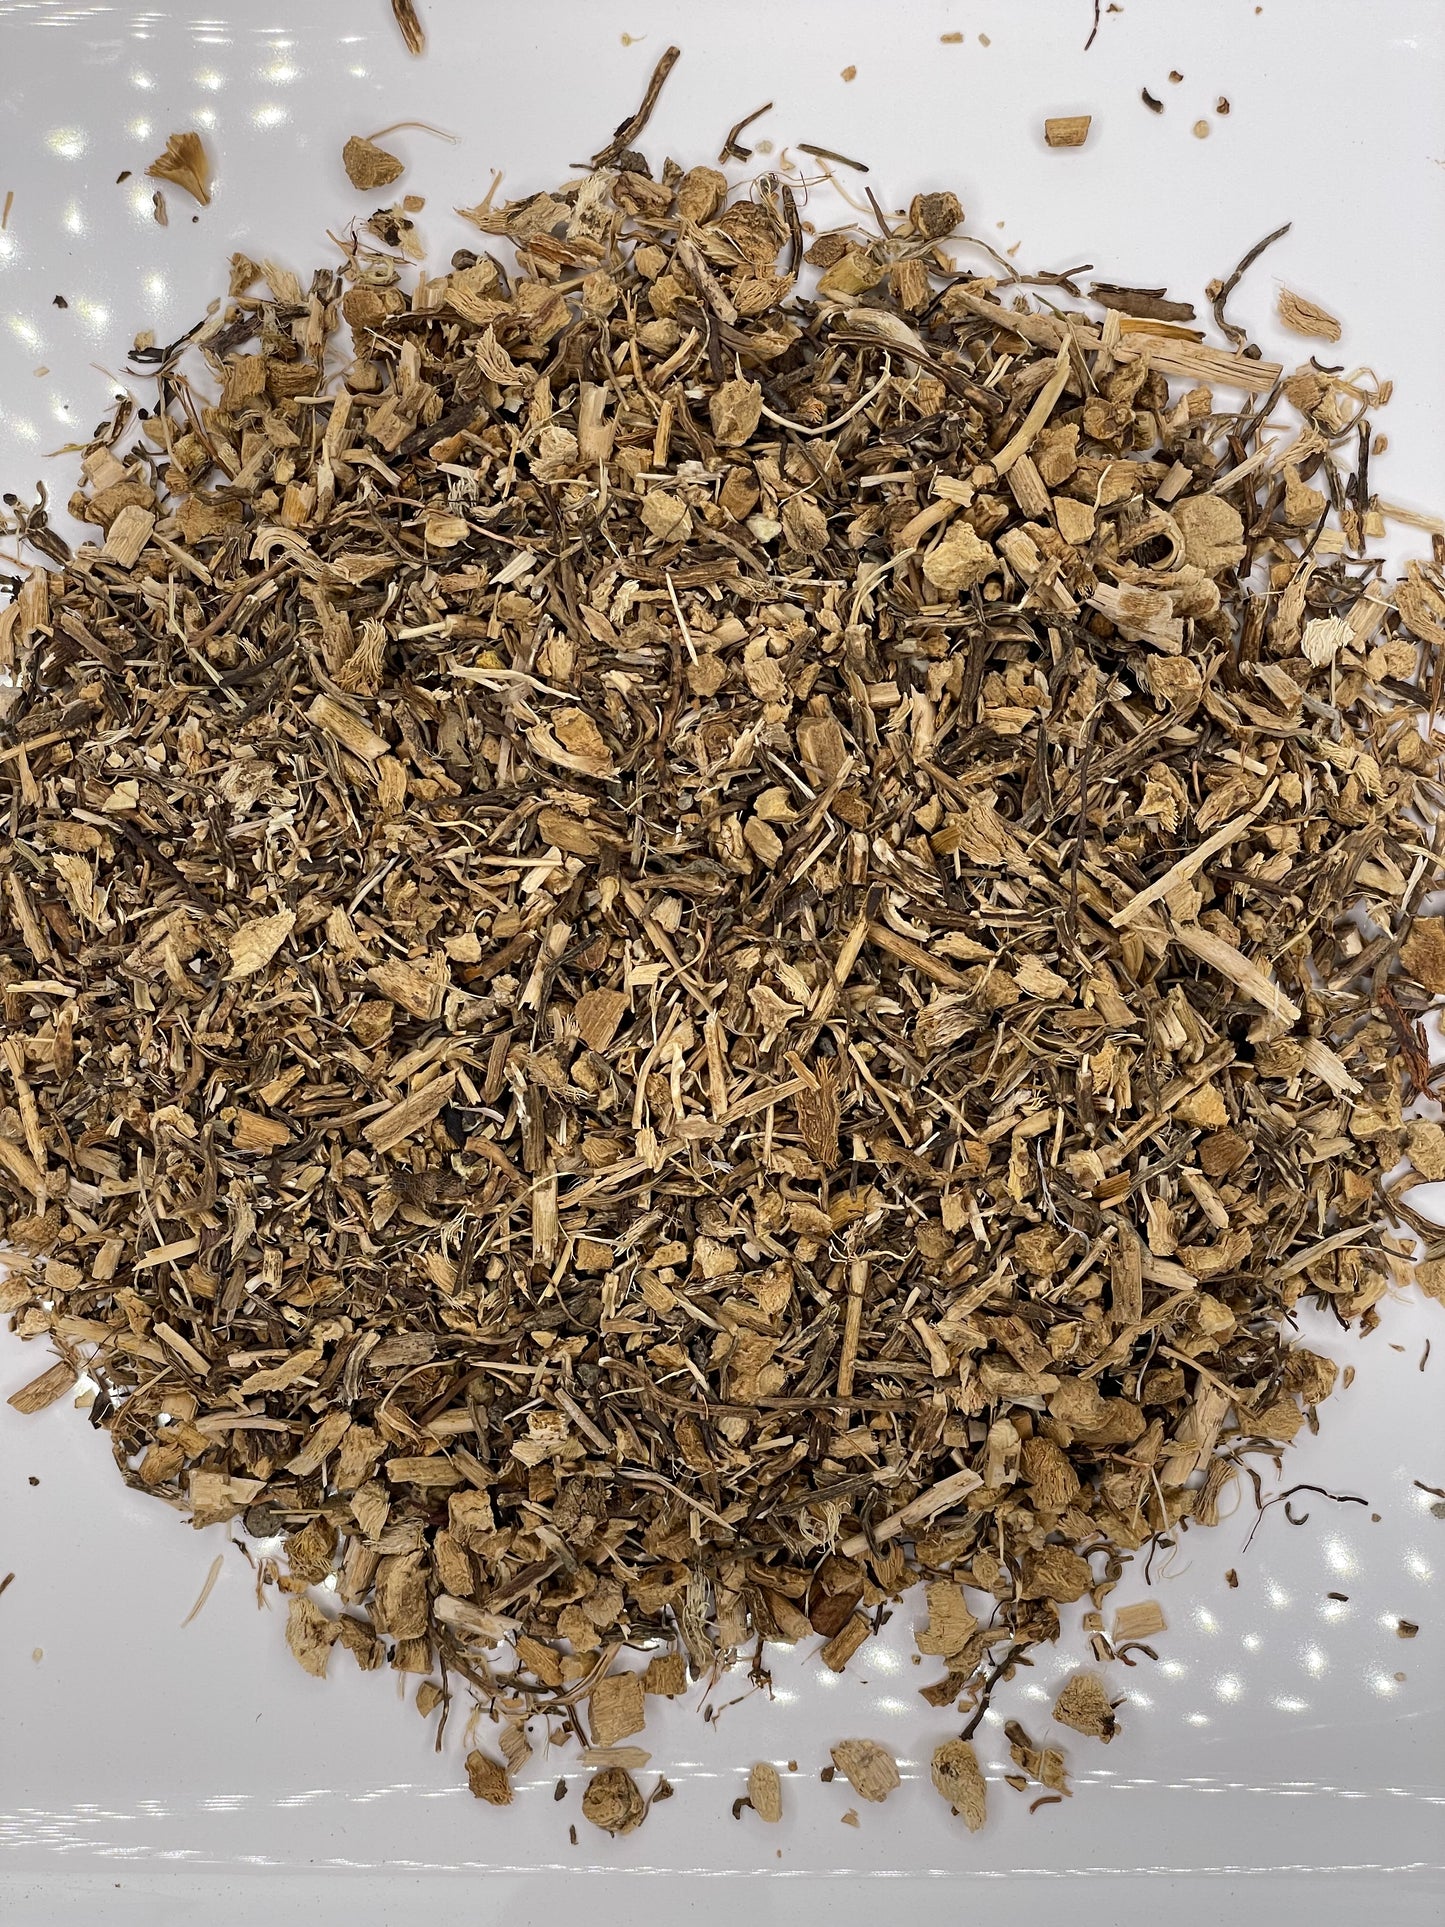 Witchy Pooh's Butcher's Broom Root Dried Strengthen Psychic Abilities, and Grounding